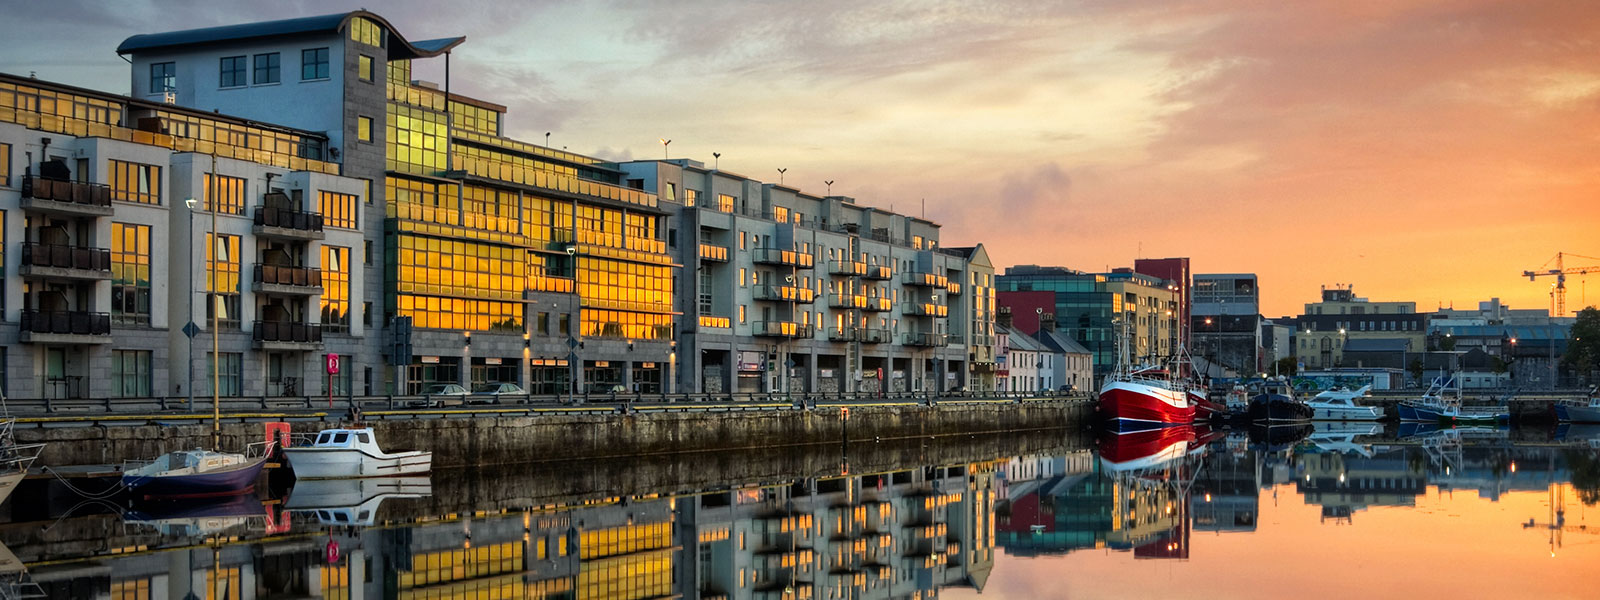 5 unique date ideas for Valentines Day in Galway